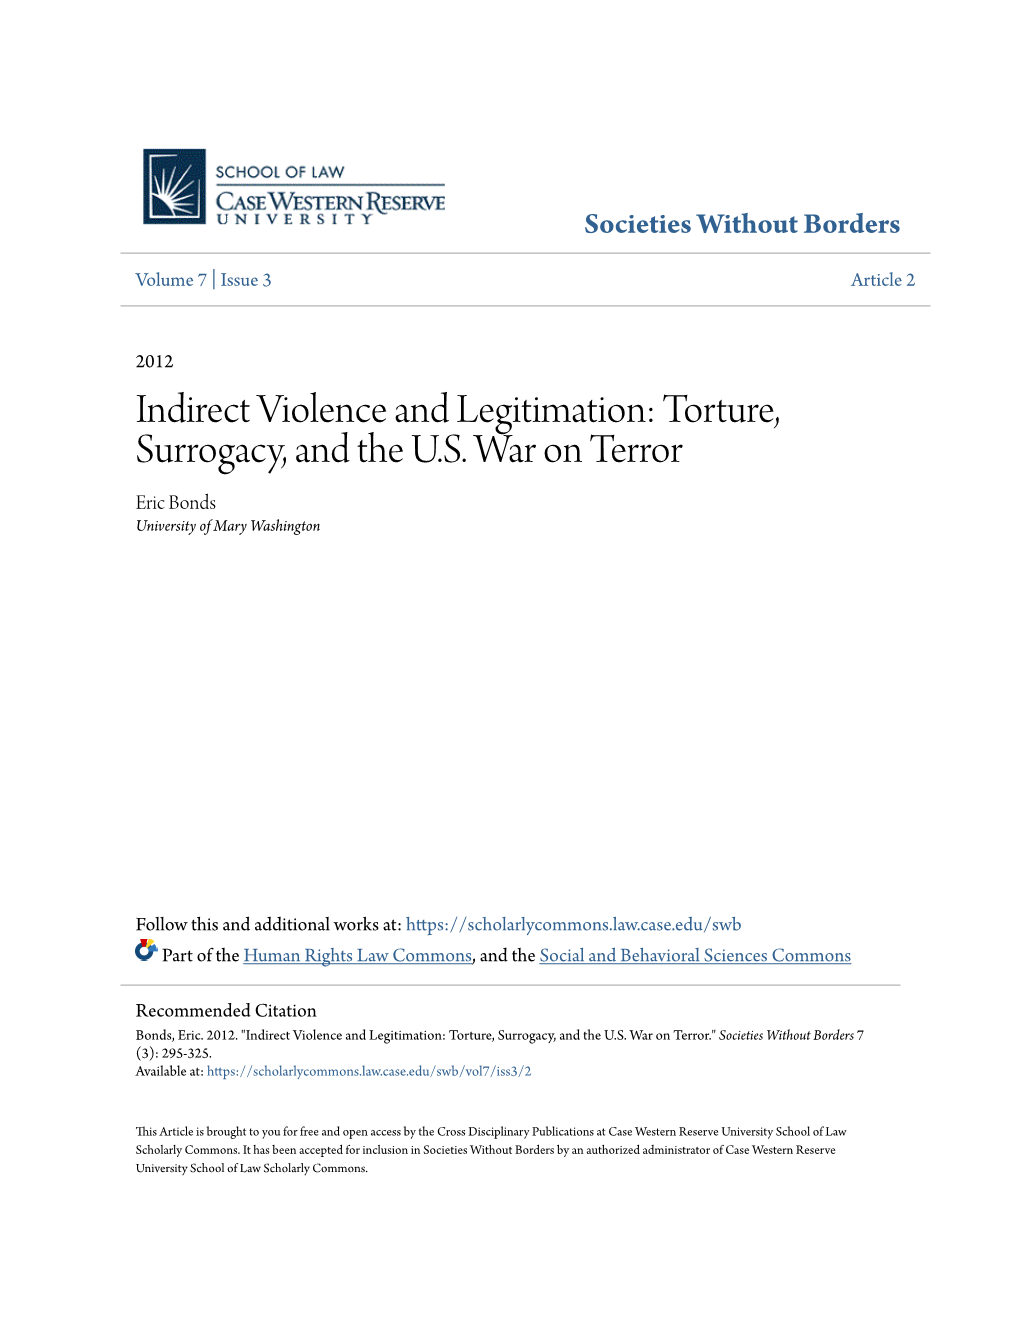 Torture, Surrogacy, and the US War on Terror